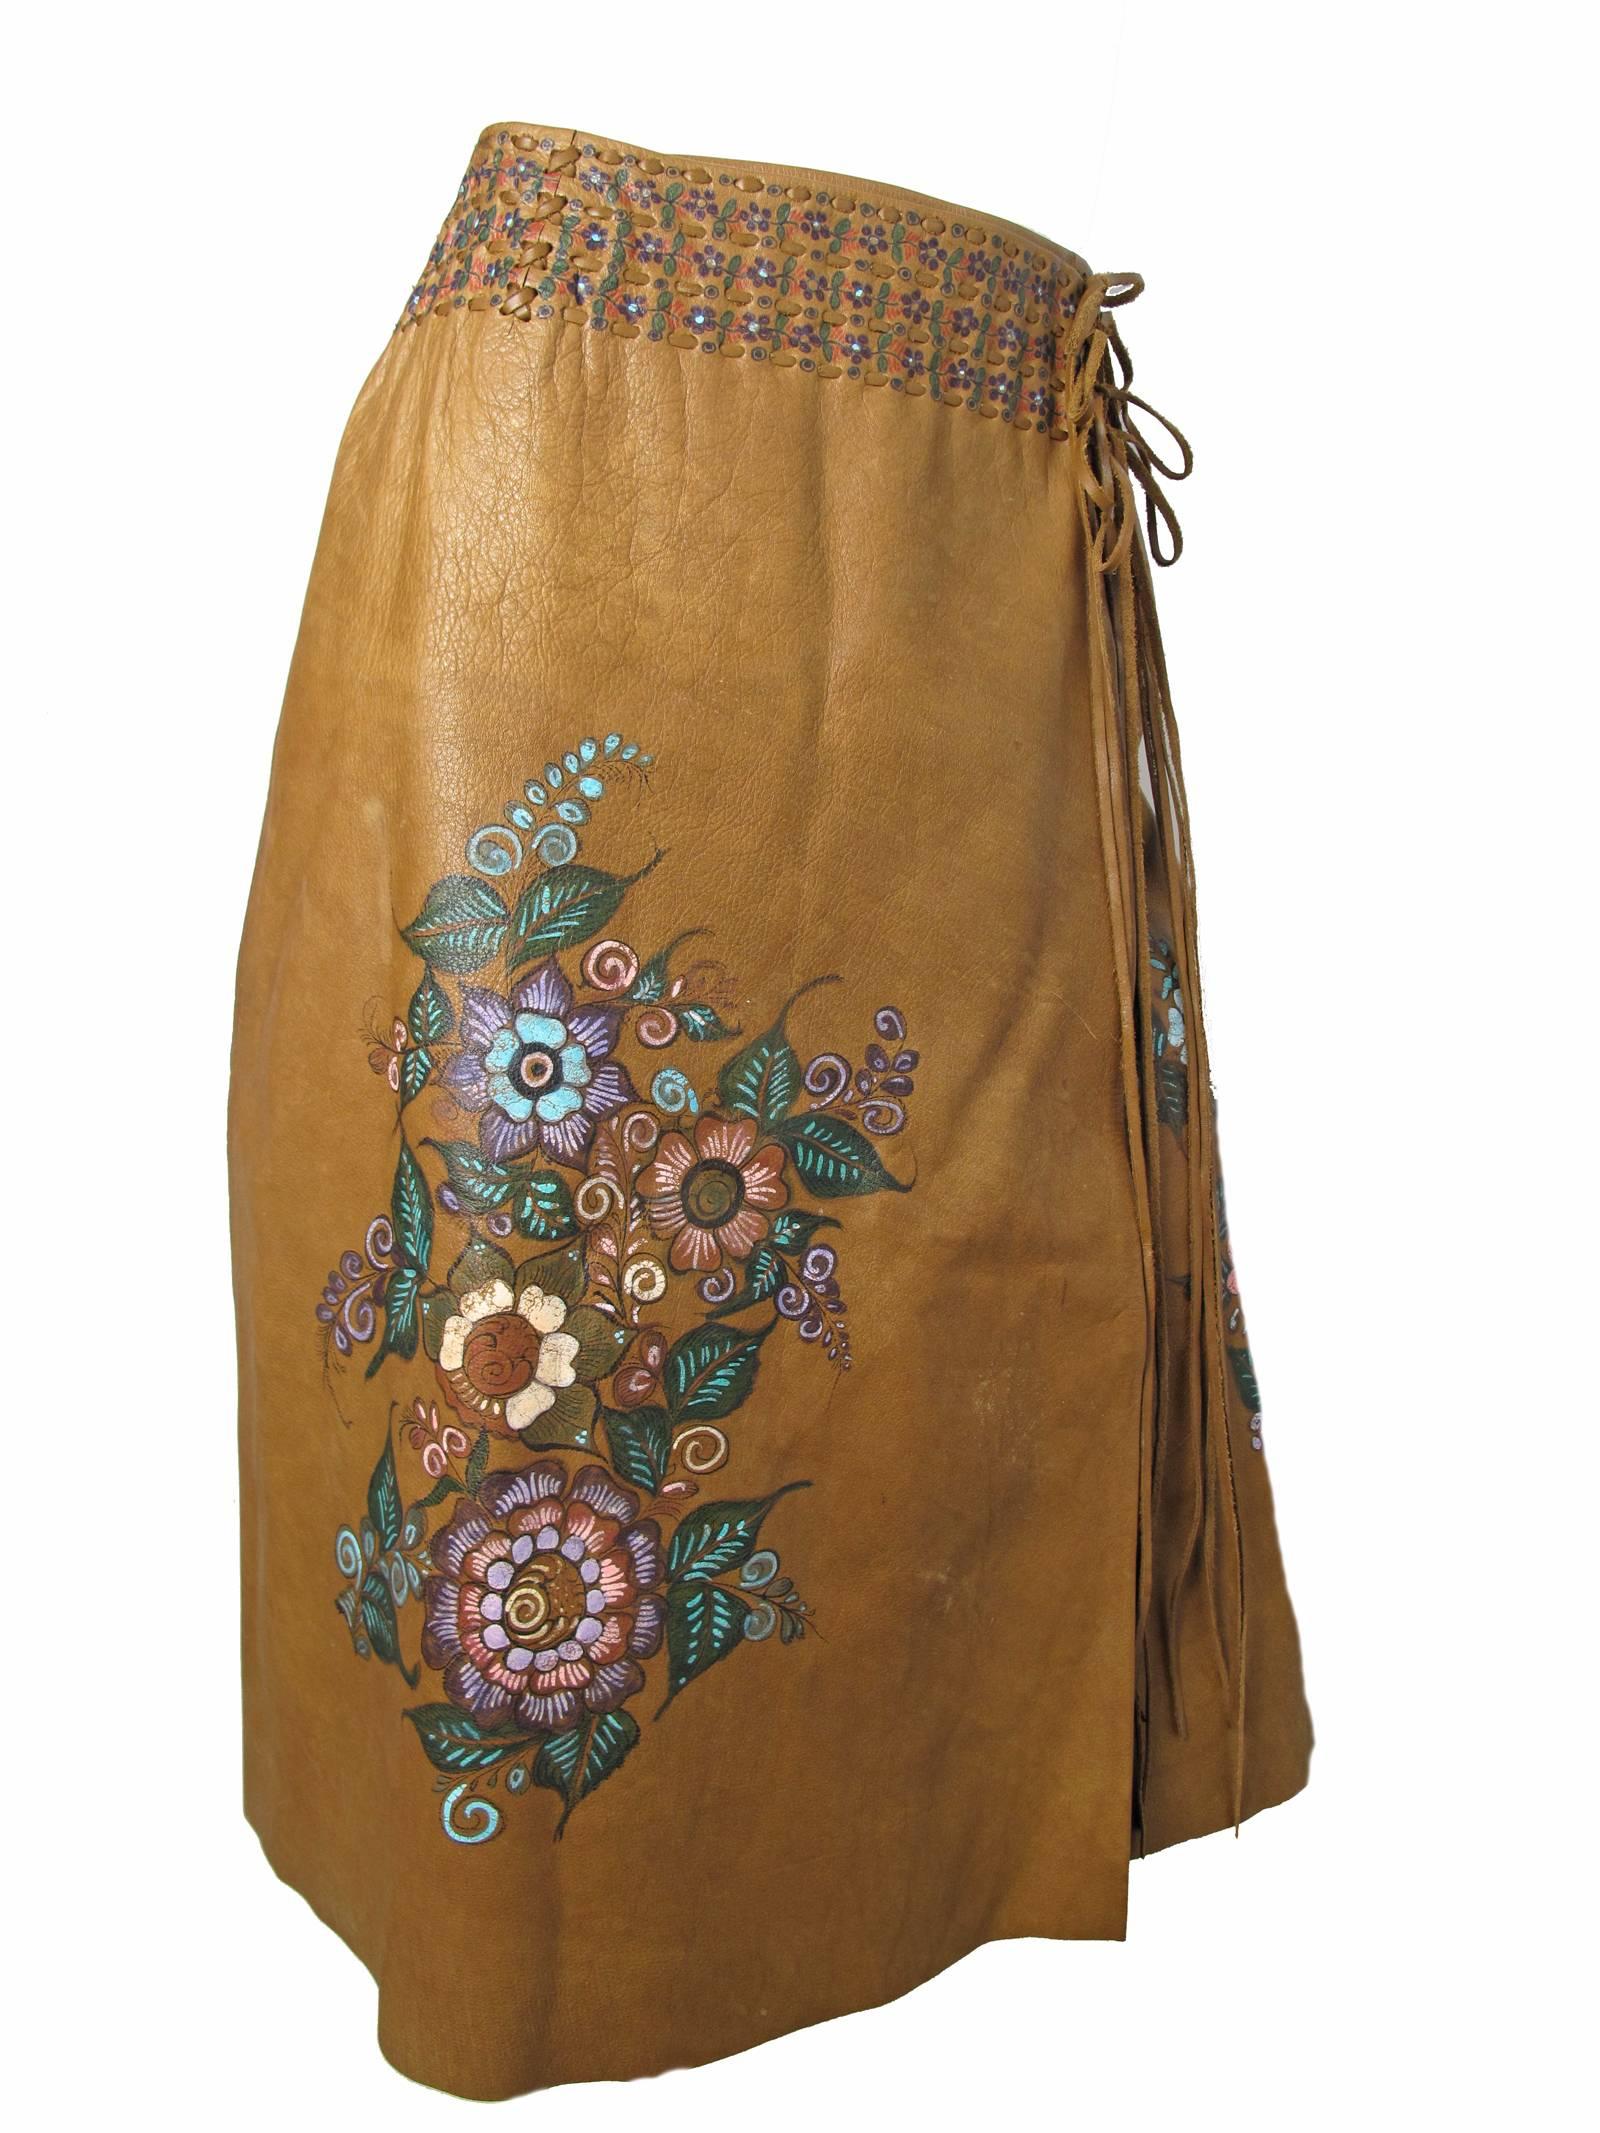 Early 1970s brown leather wrap skirt with hand painting.  Lacing on side.  Condition: Good, wear to paint and leather.  
Size 8 